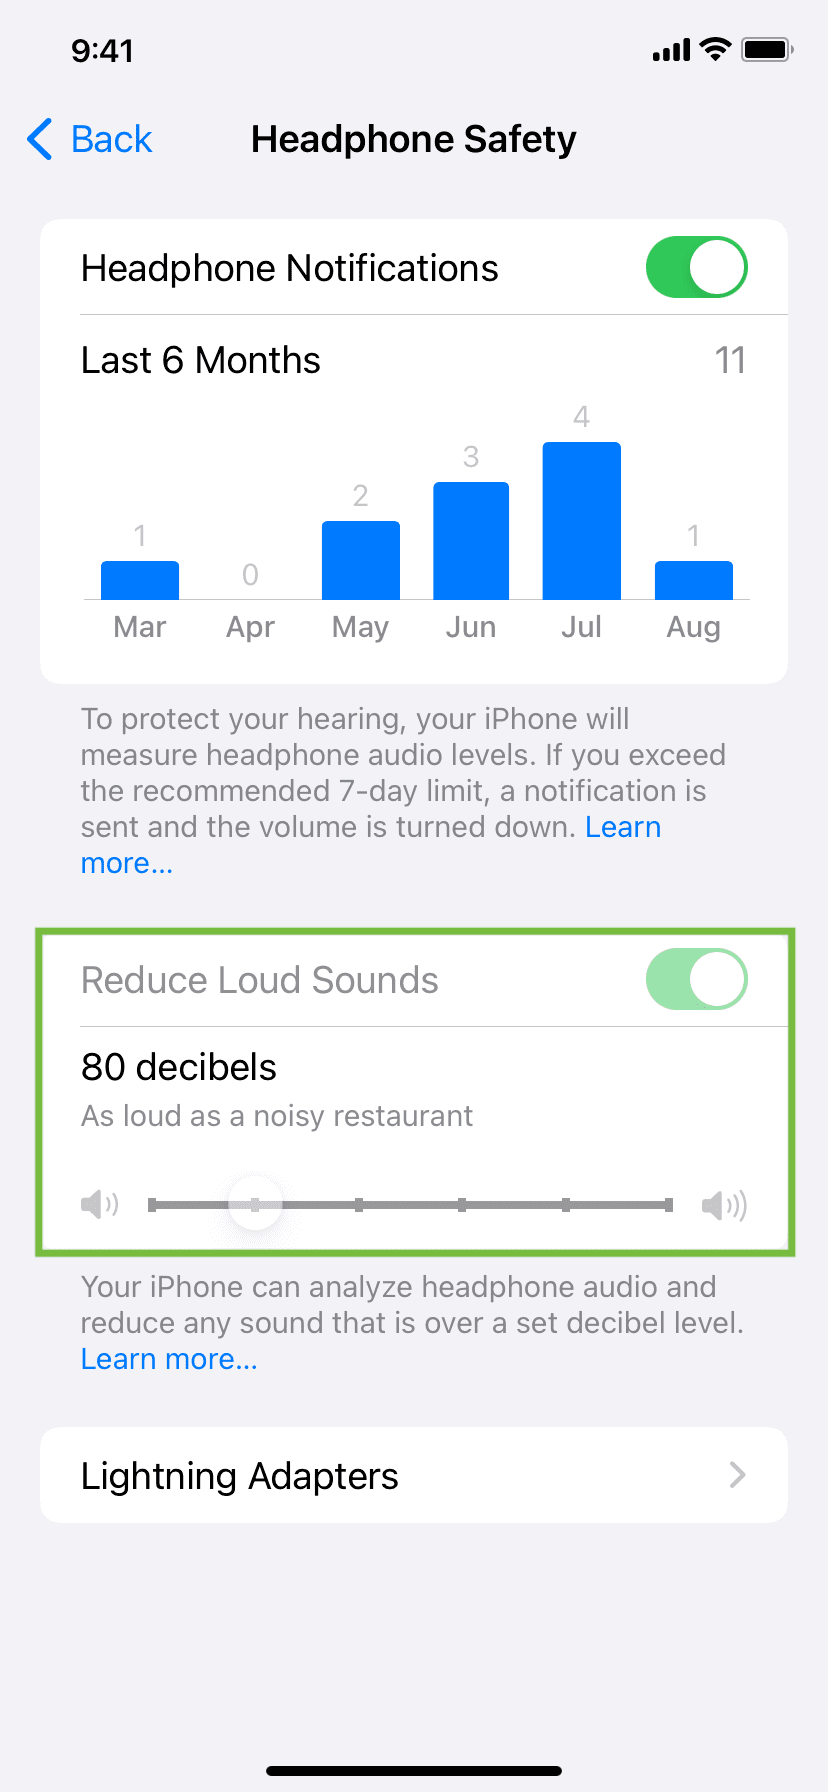 Grayed our Reduce Loud Sounds option on iPhone